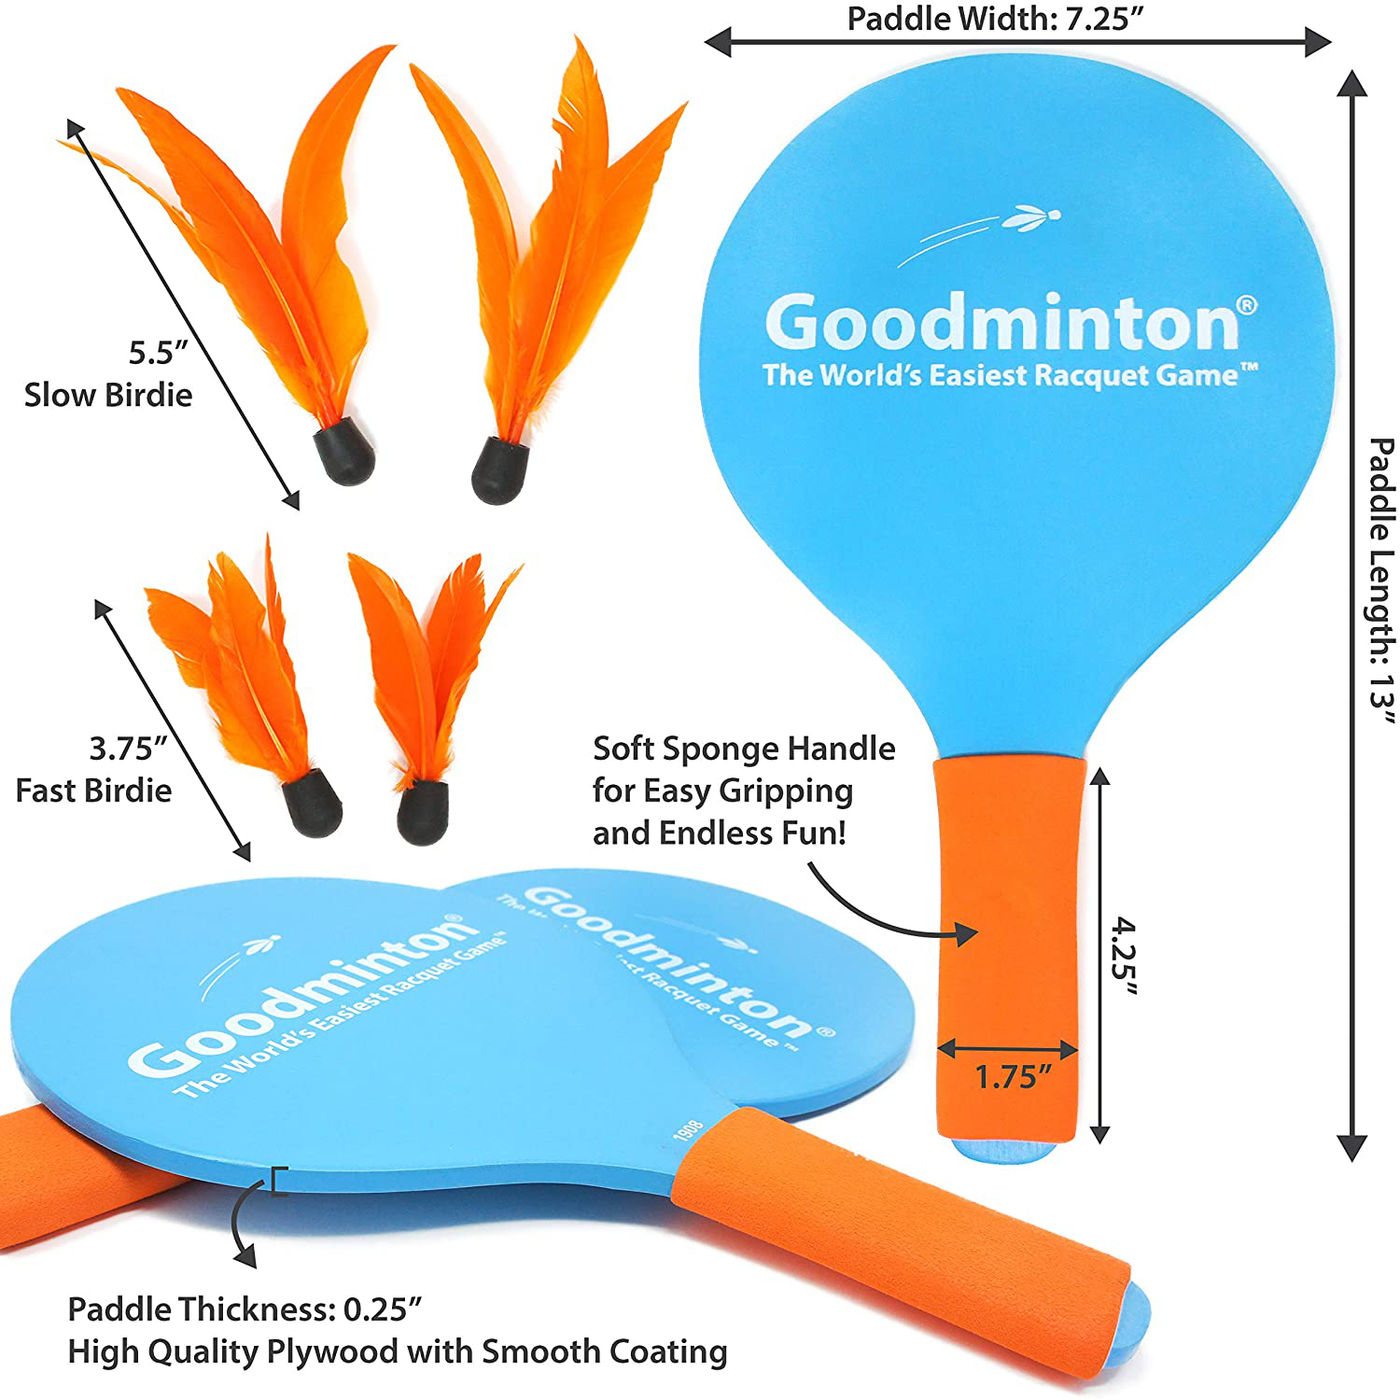 VIAHART Goodminton | The World's Easiest Racket Game | an Indoor Outdoor Year-Round Fun Racquet Game for Boys, Girls, and People of All Ages